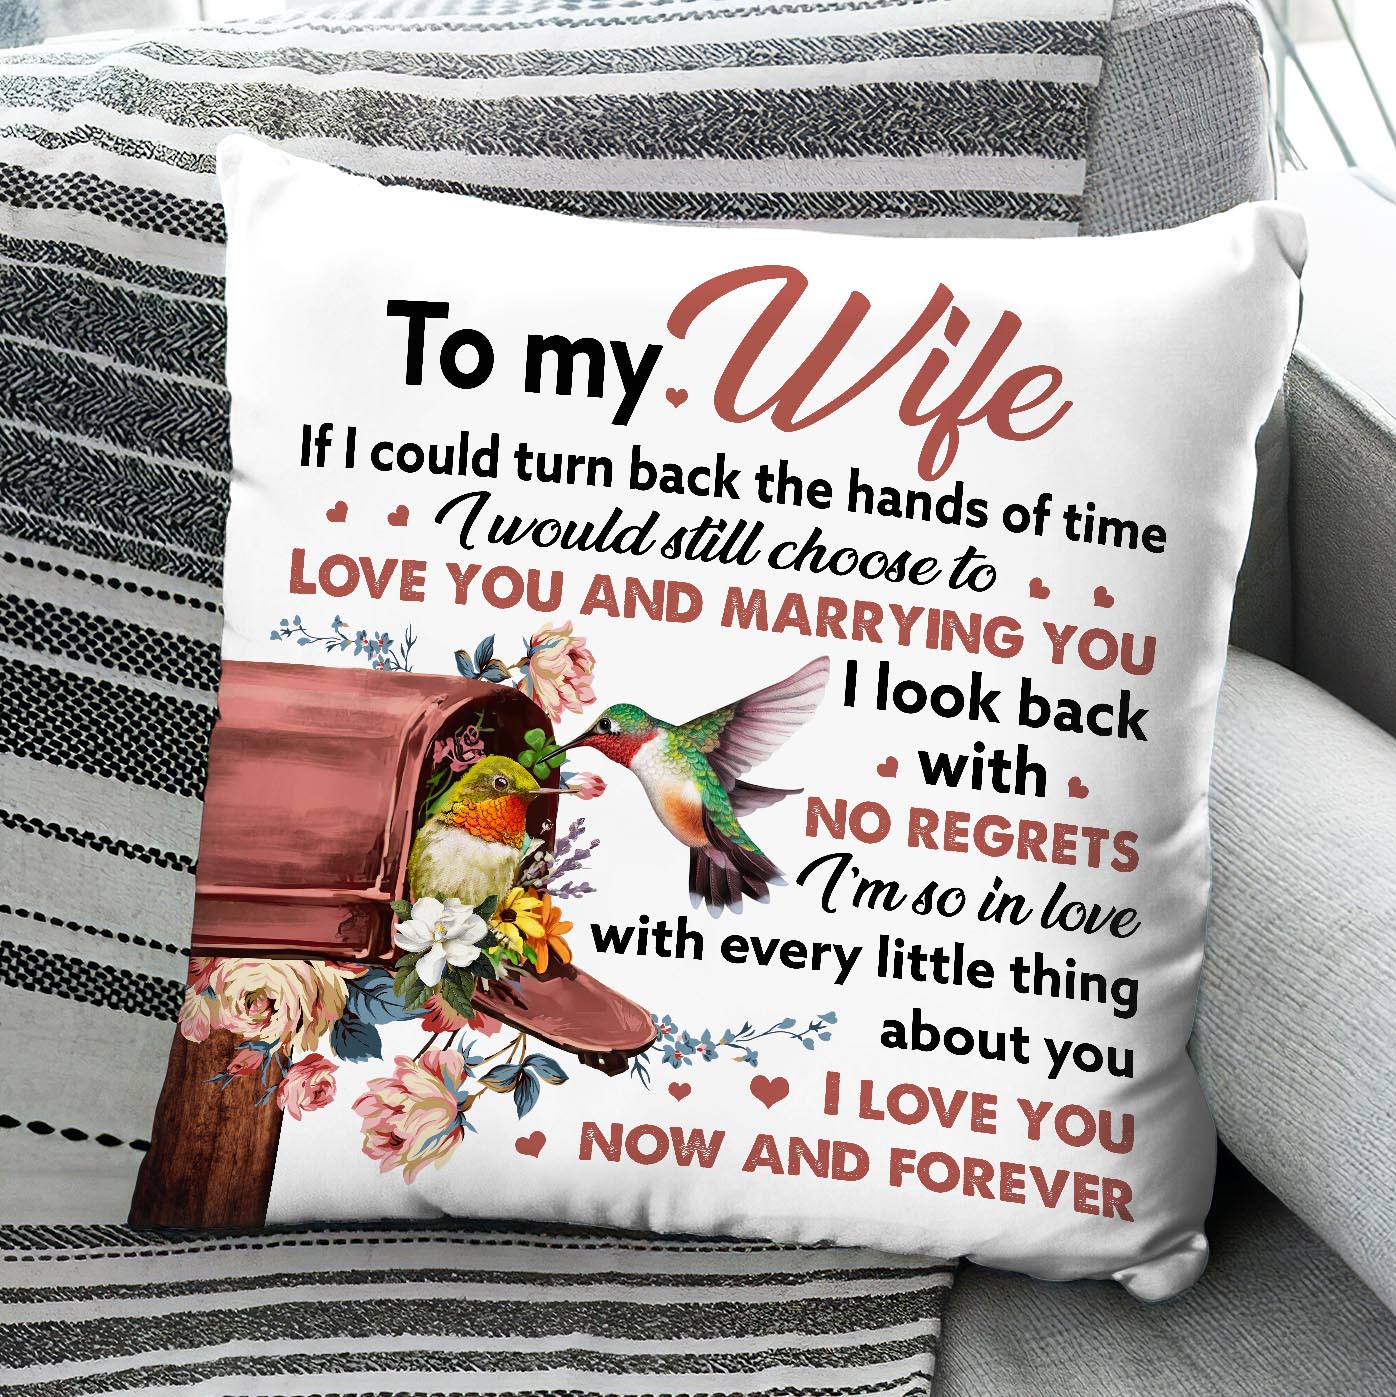 To my wife - Hummingbird and letter box - I'm in love with every little thing about you - Pillow